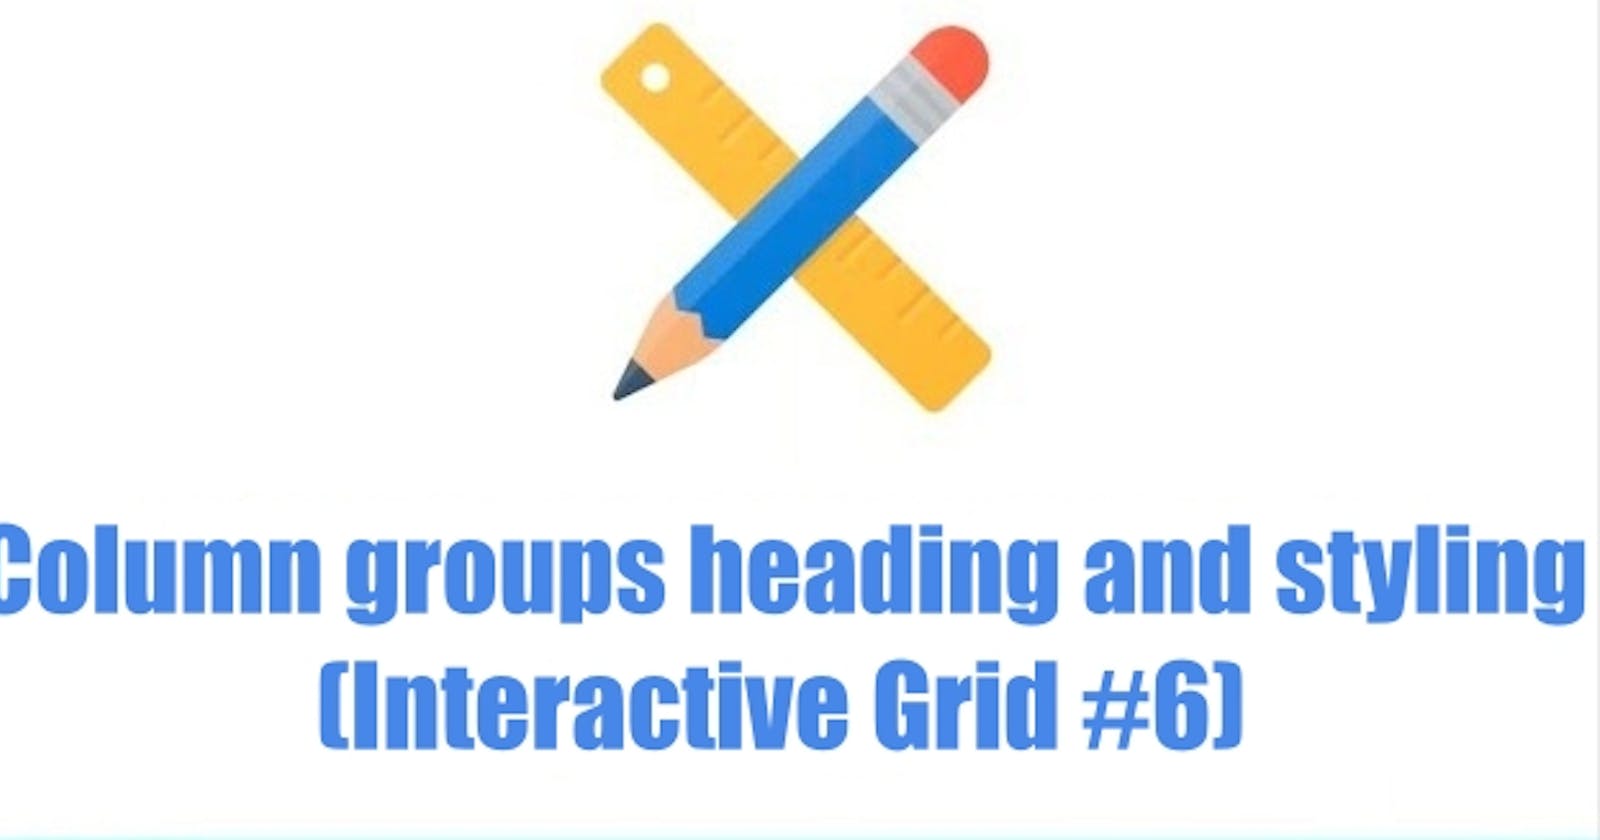 Column groups heading and styling (Interactive Grid #6)